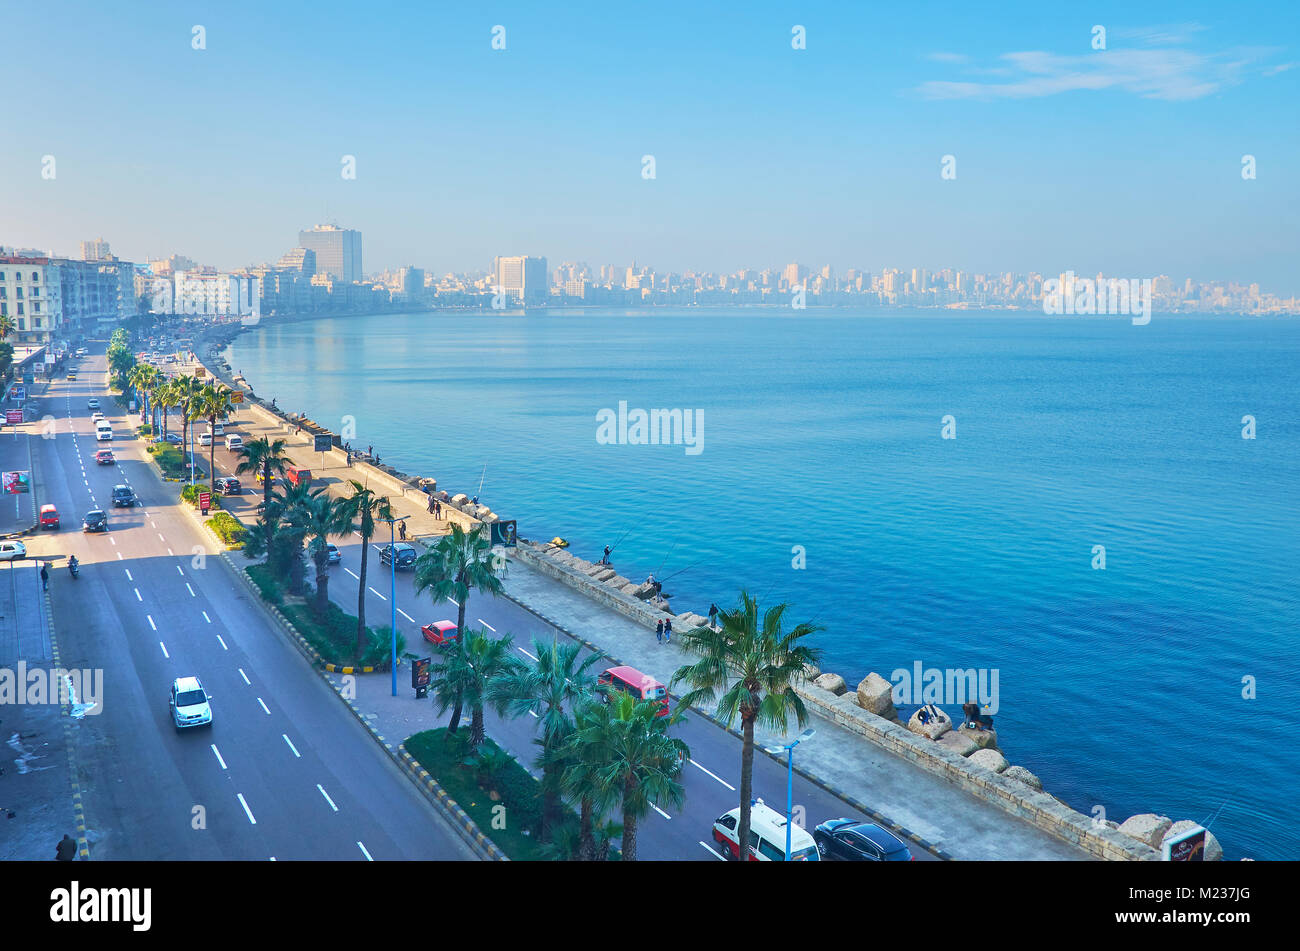 ALEXANDRIA, EGYPT - DECEMBER 18, 2017: The heavy traffic along the Corniche embankment, the buildings of city center are seen through the morning haze Stock Photo